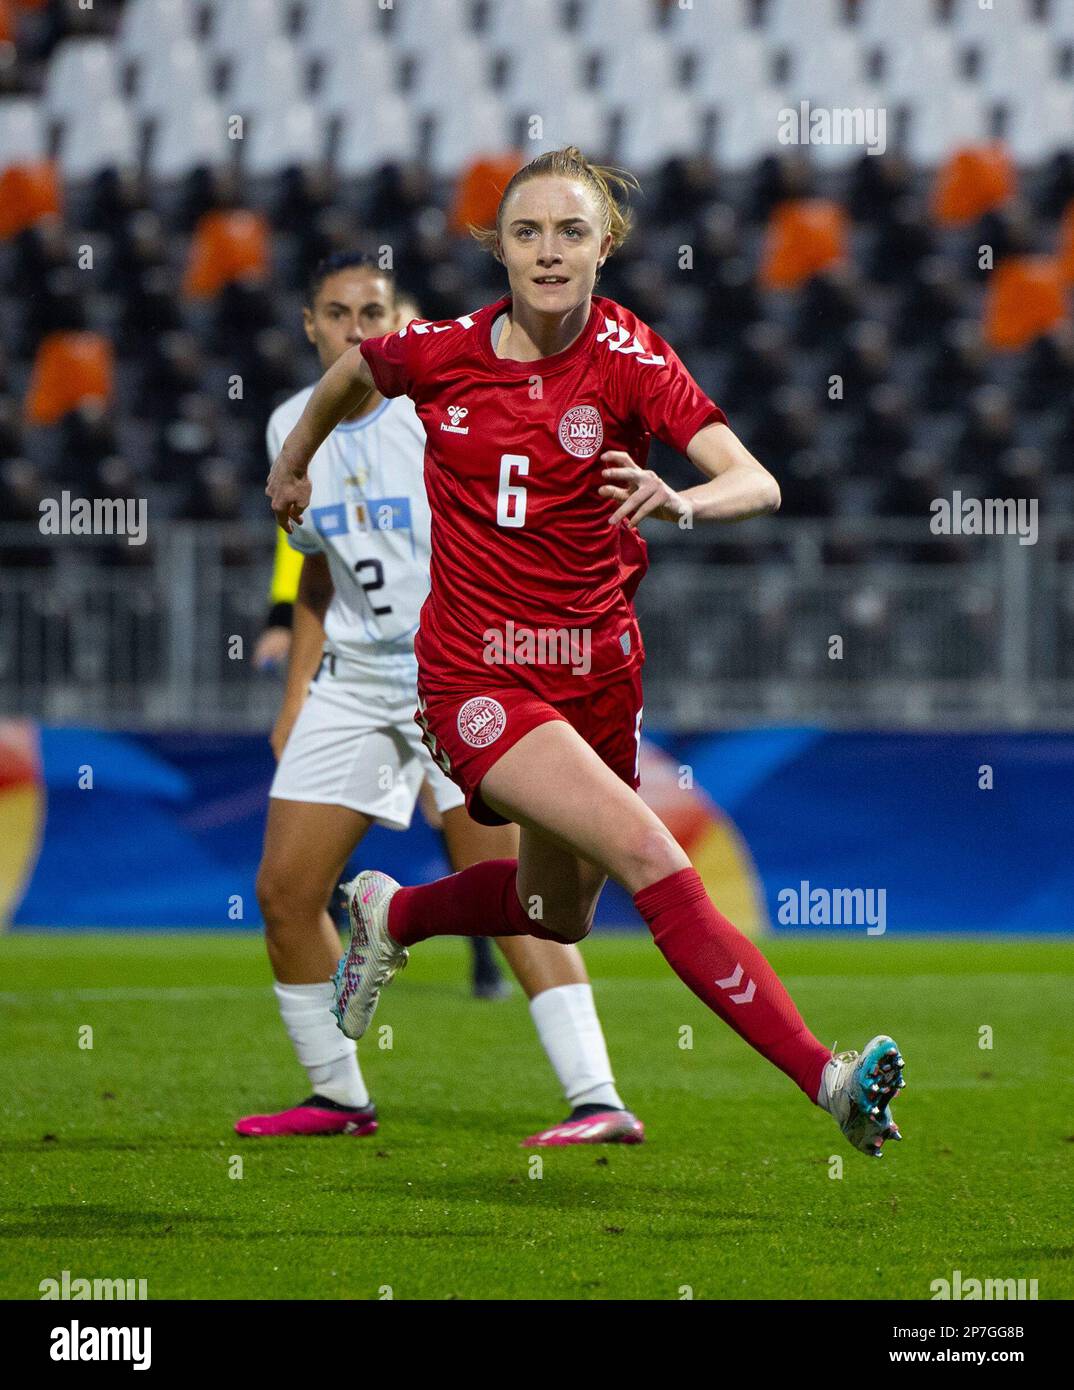 Laval, France, February 21st 2023: Karen Holmgaard (6 Denmark) in action during the International friendly football match between Denmark and Uruguay at Stade Francis Le Basser in Laval, France  (James Whitehead / SPP) Stock Photo